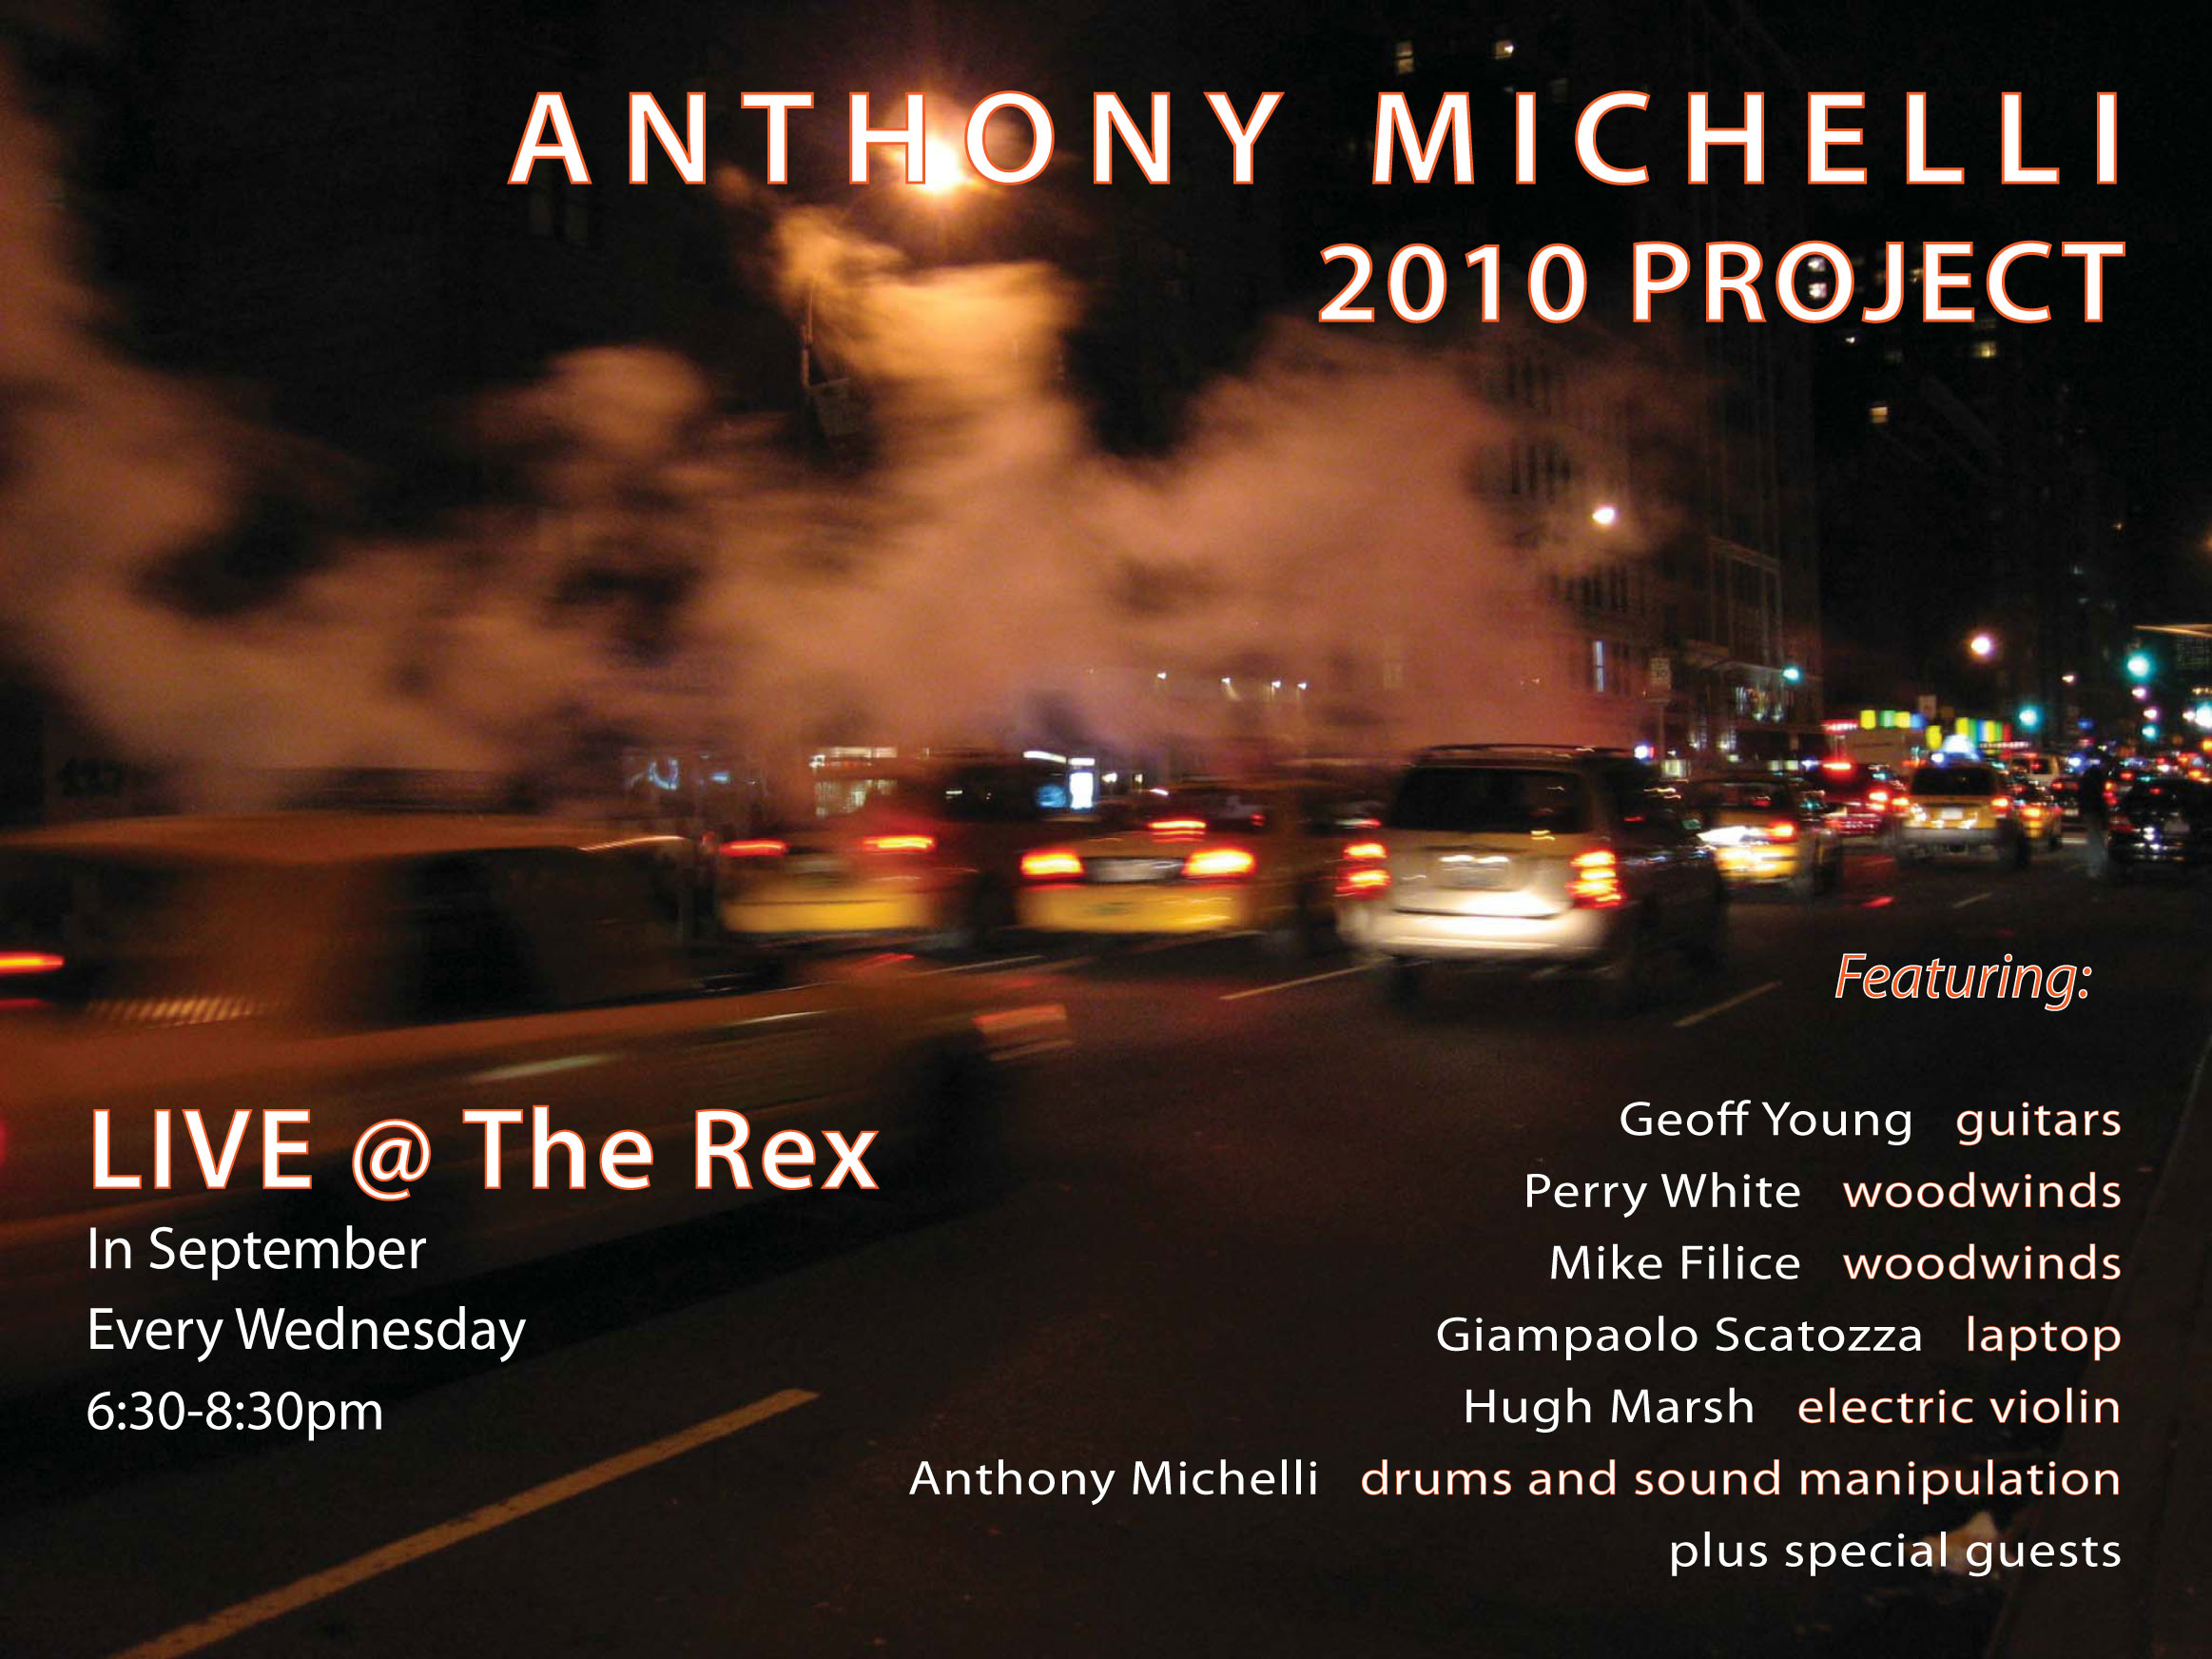 Anthony Michelli 2010 Project - Performing every Wednesdays at the Rex, 6:30pm